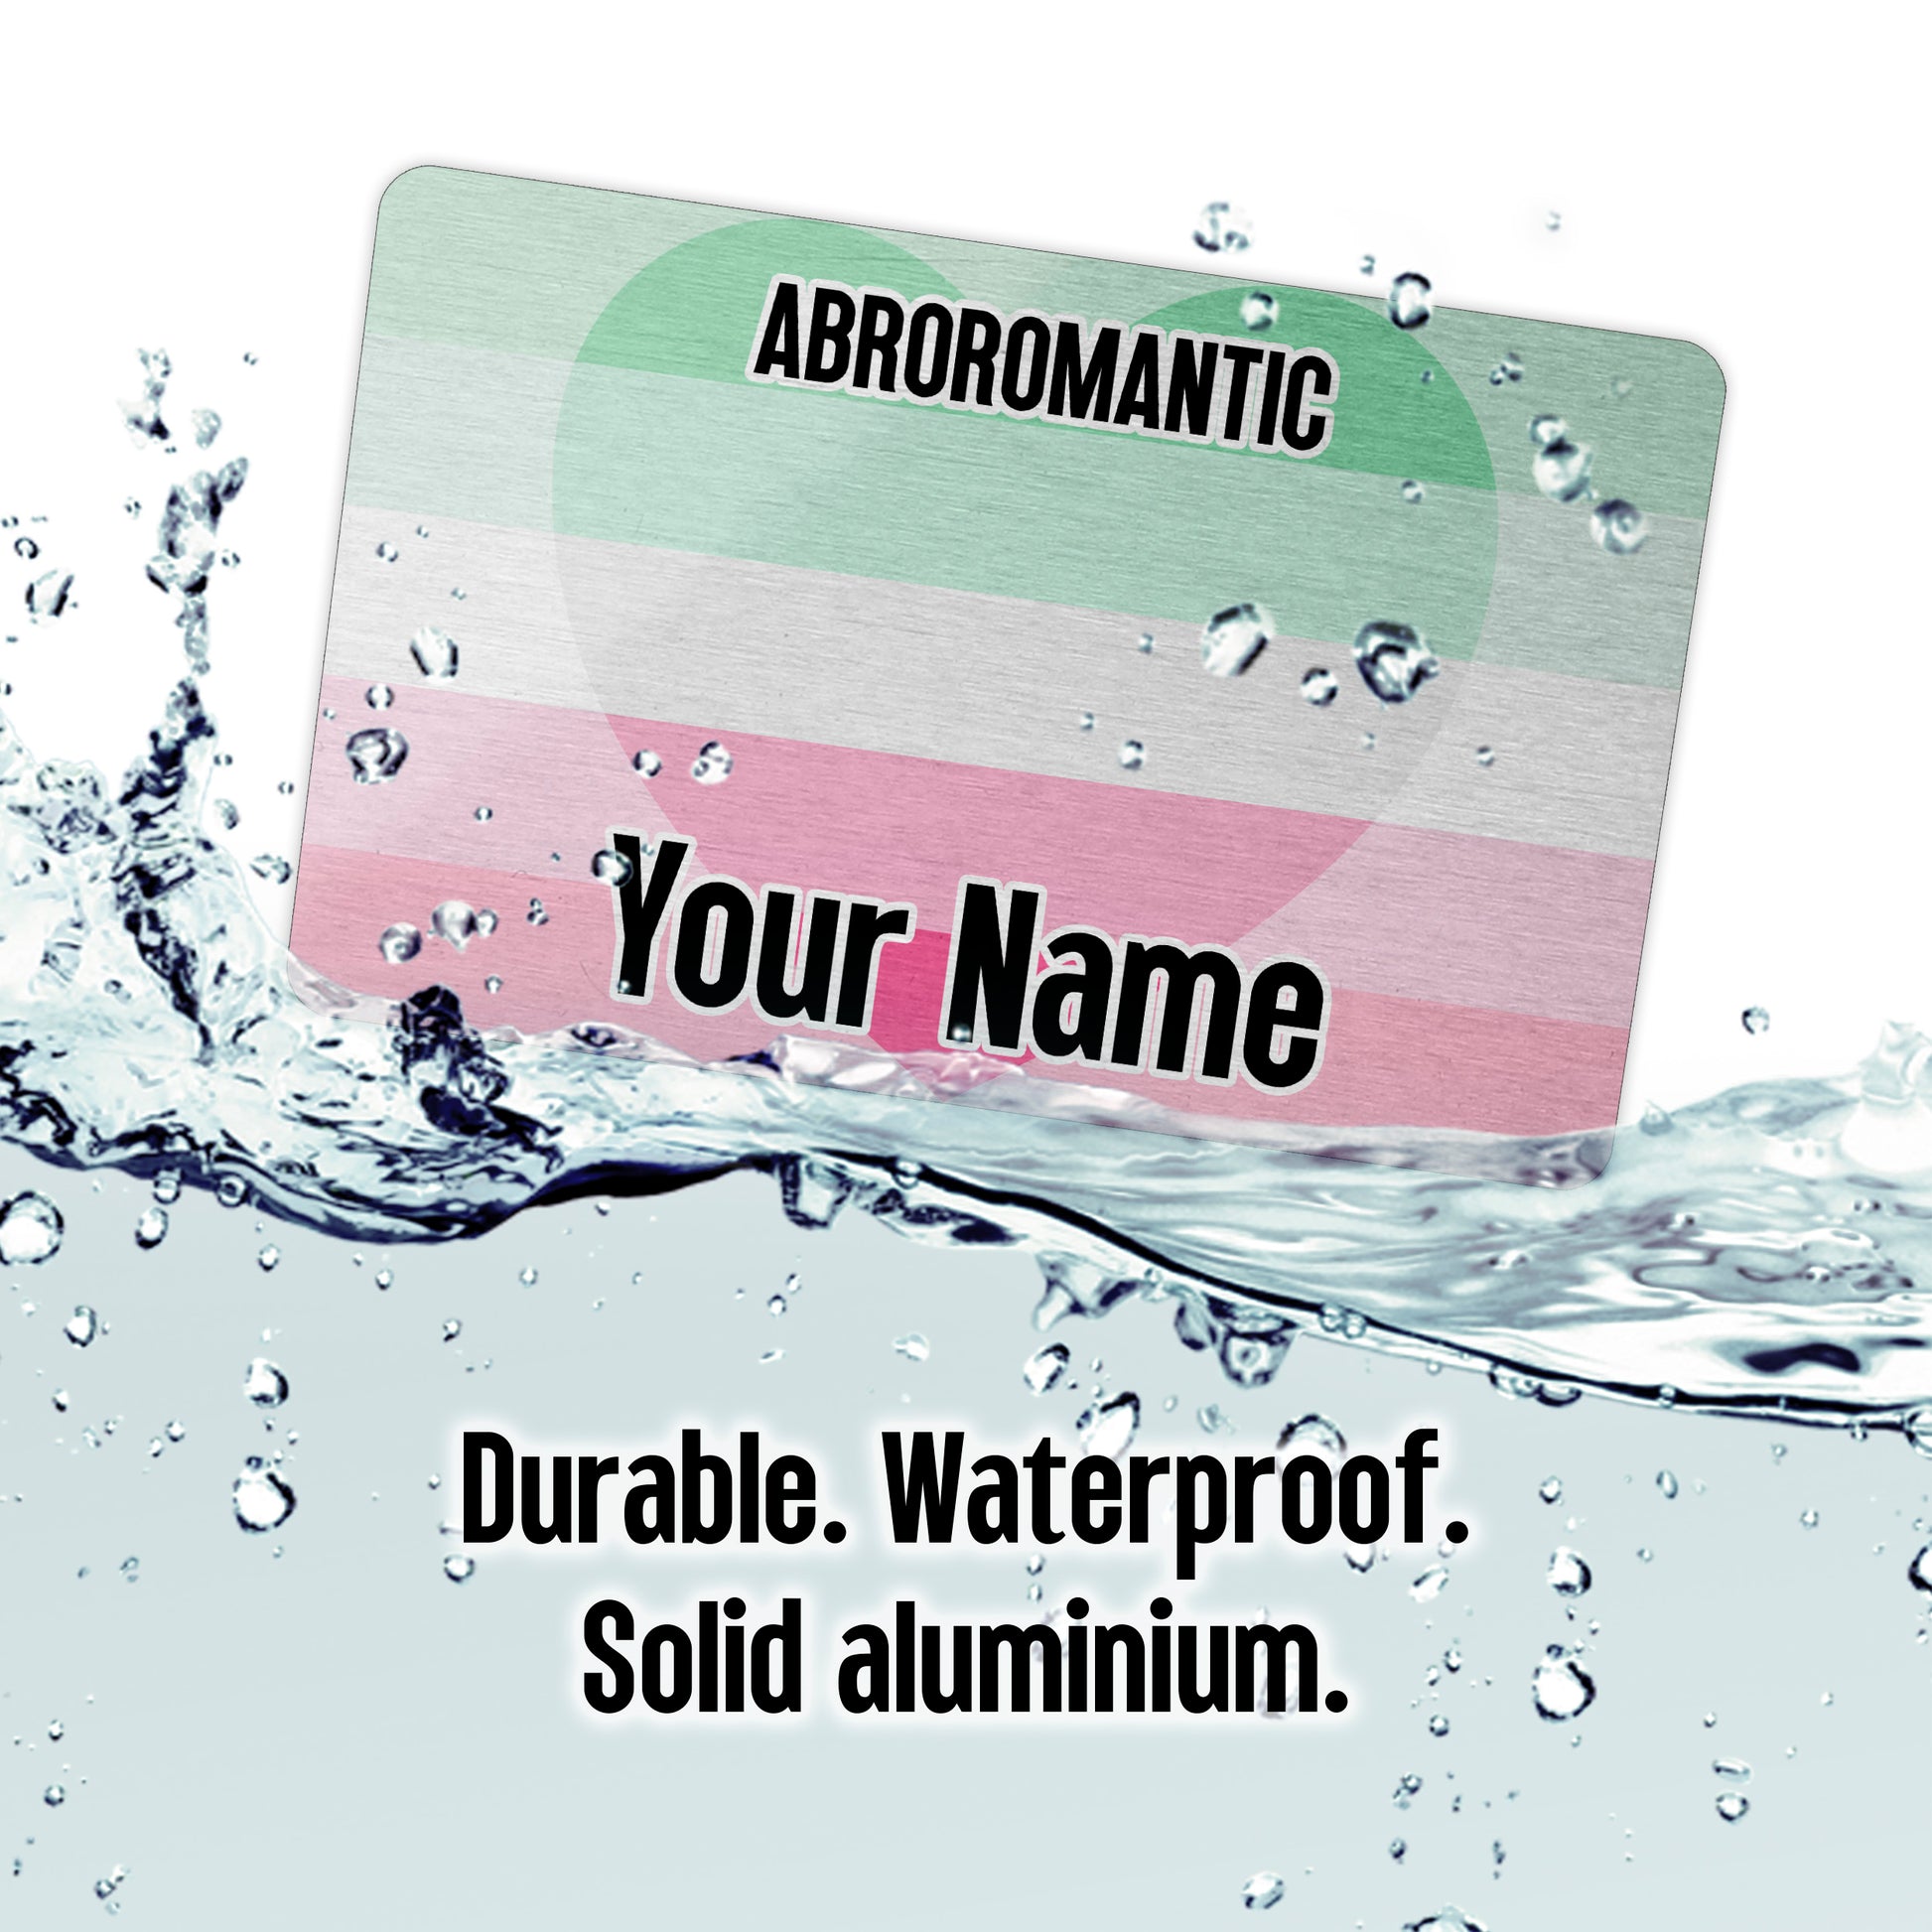 Aluminium metal wallet card personalised with your name and the abroromantic pride flag